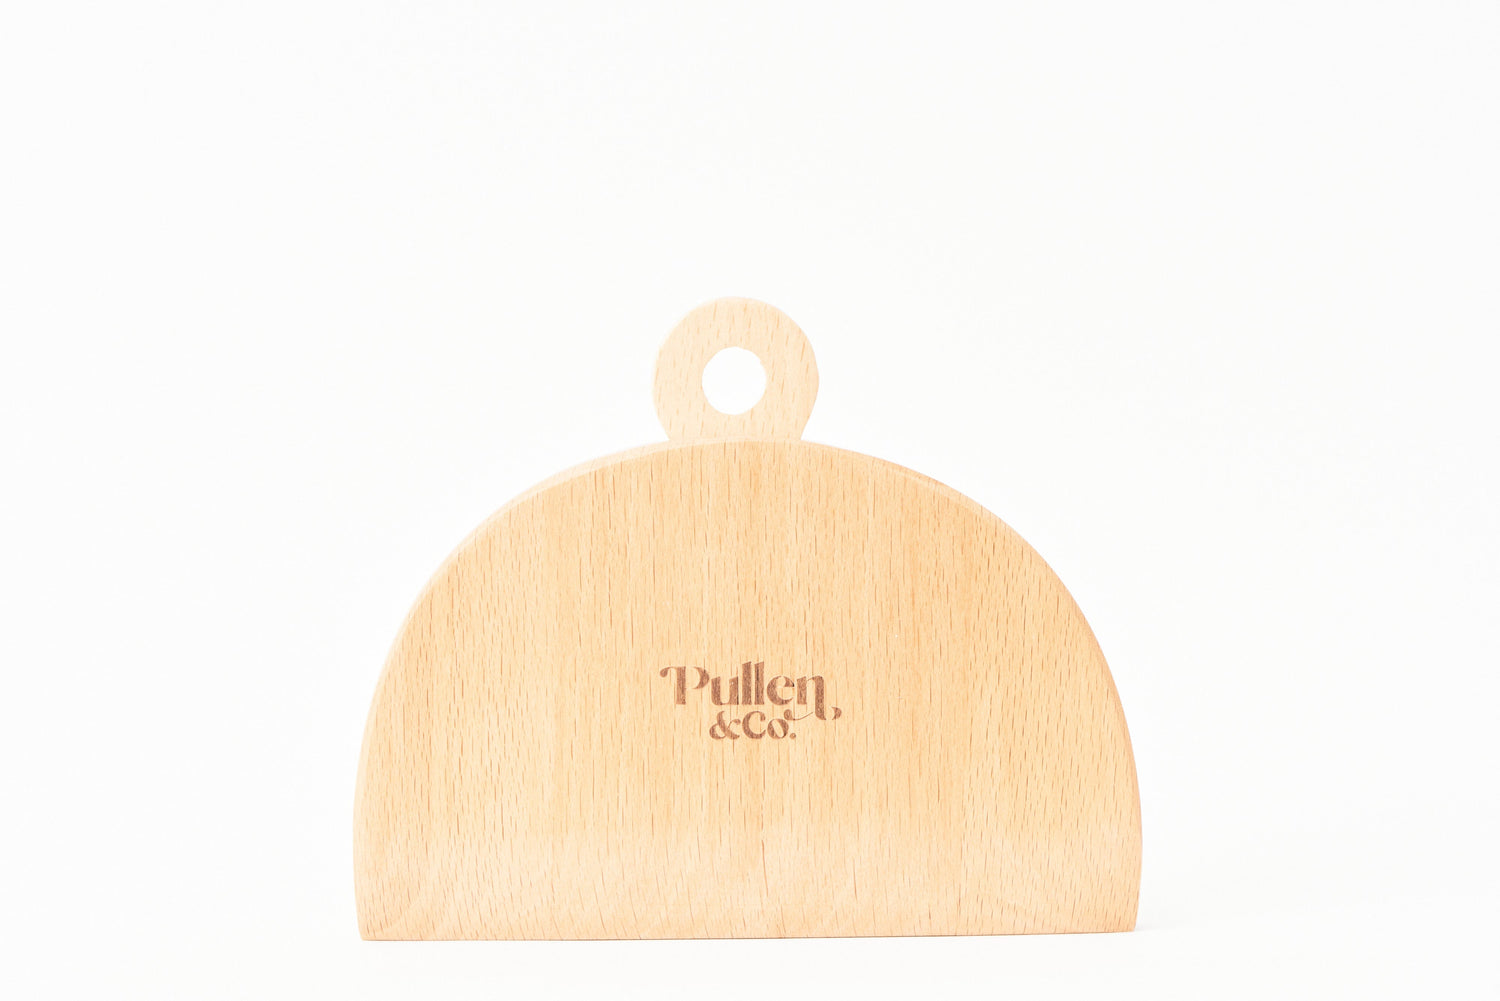 Pullen and Co Household Cleaning Supplies Table birchwood brush and dustpan (7347397296299)